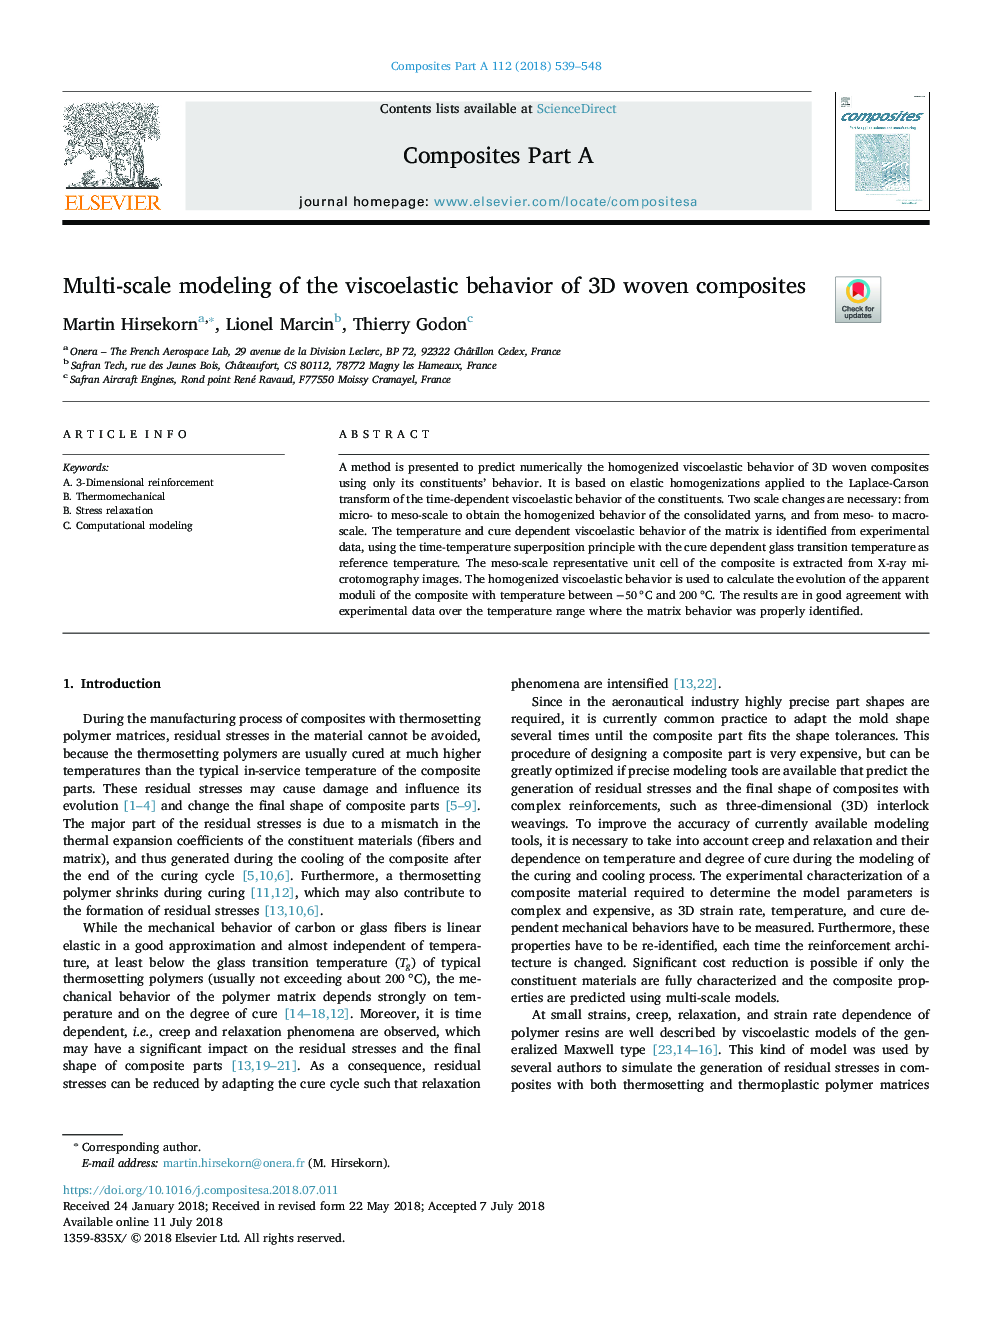 Multi-scale modeling of the viscoelastic behavior of 3D woven composites